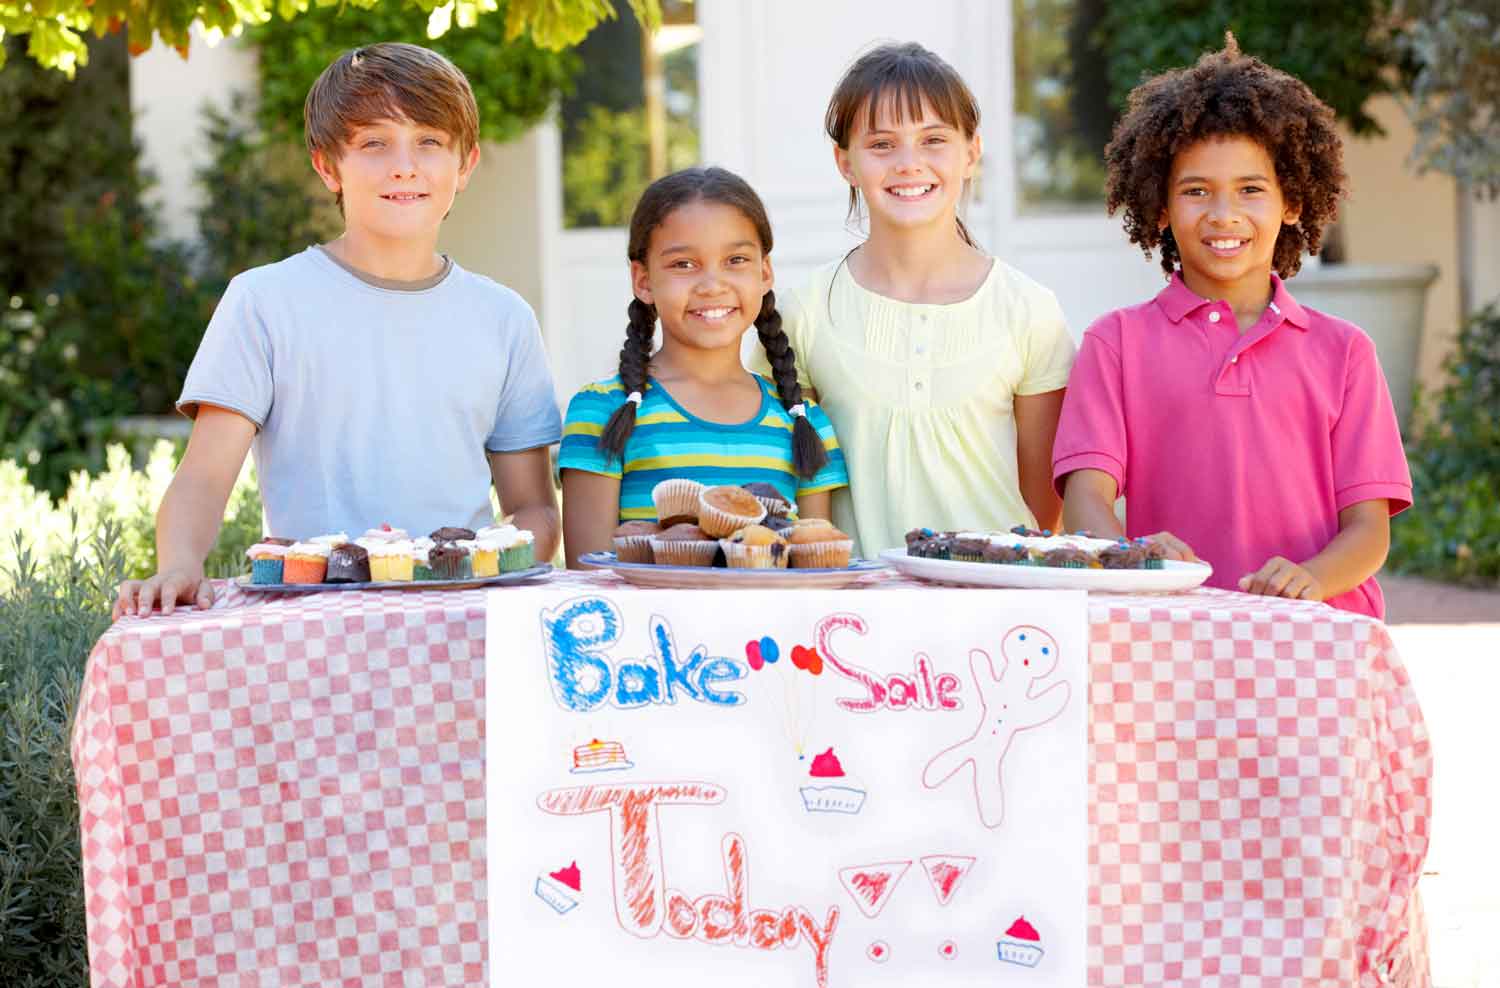 Four children pose behind a take with baked goods and a sign that says Bake Sale.